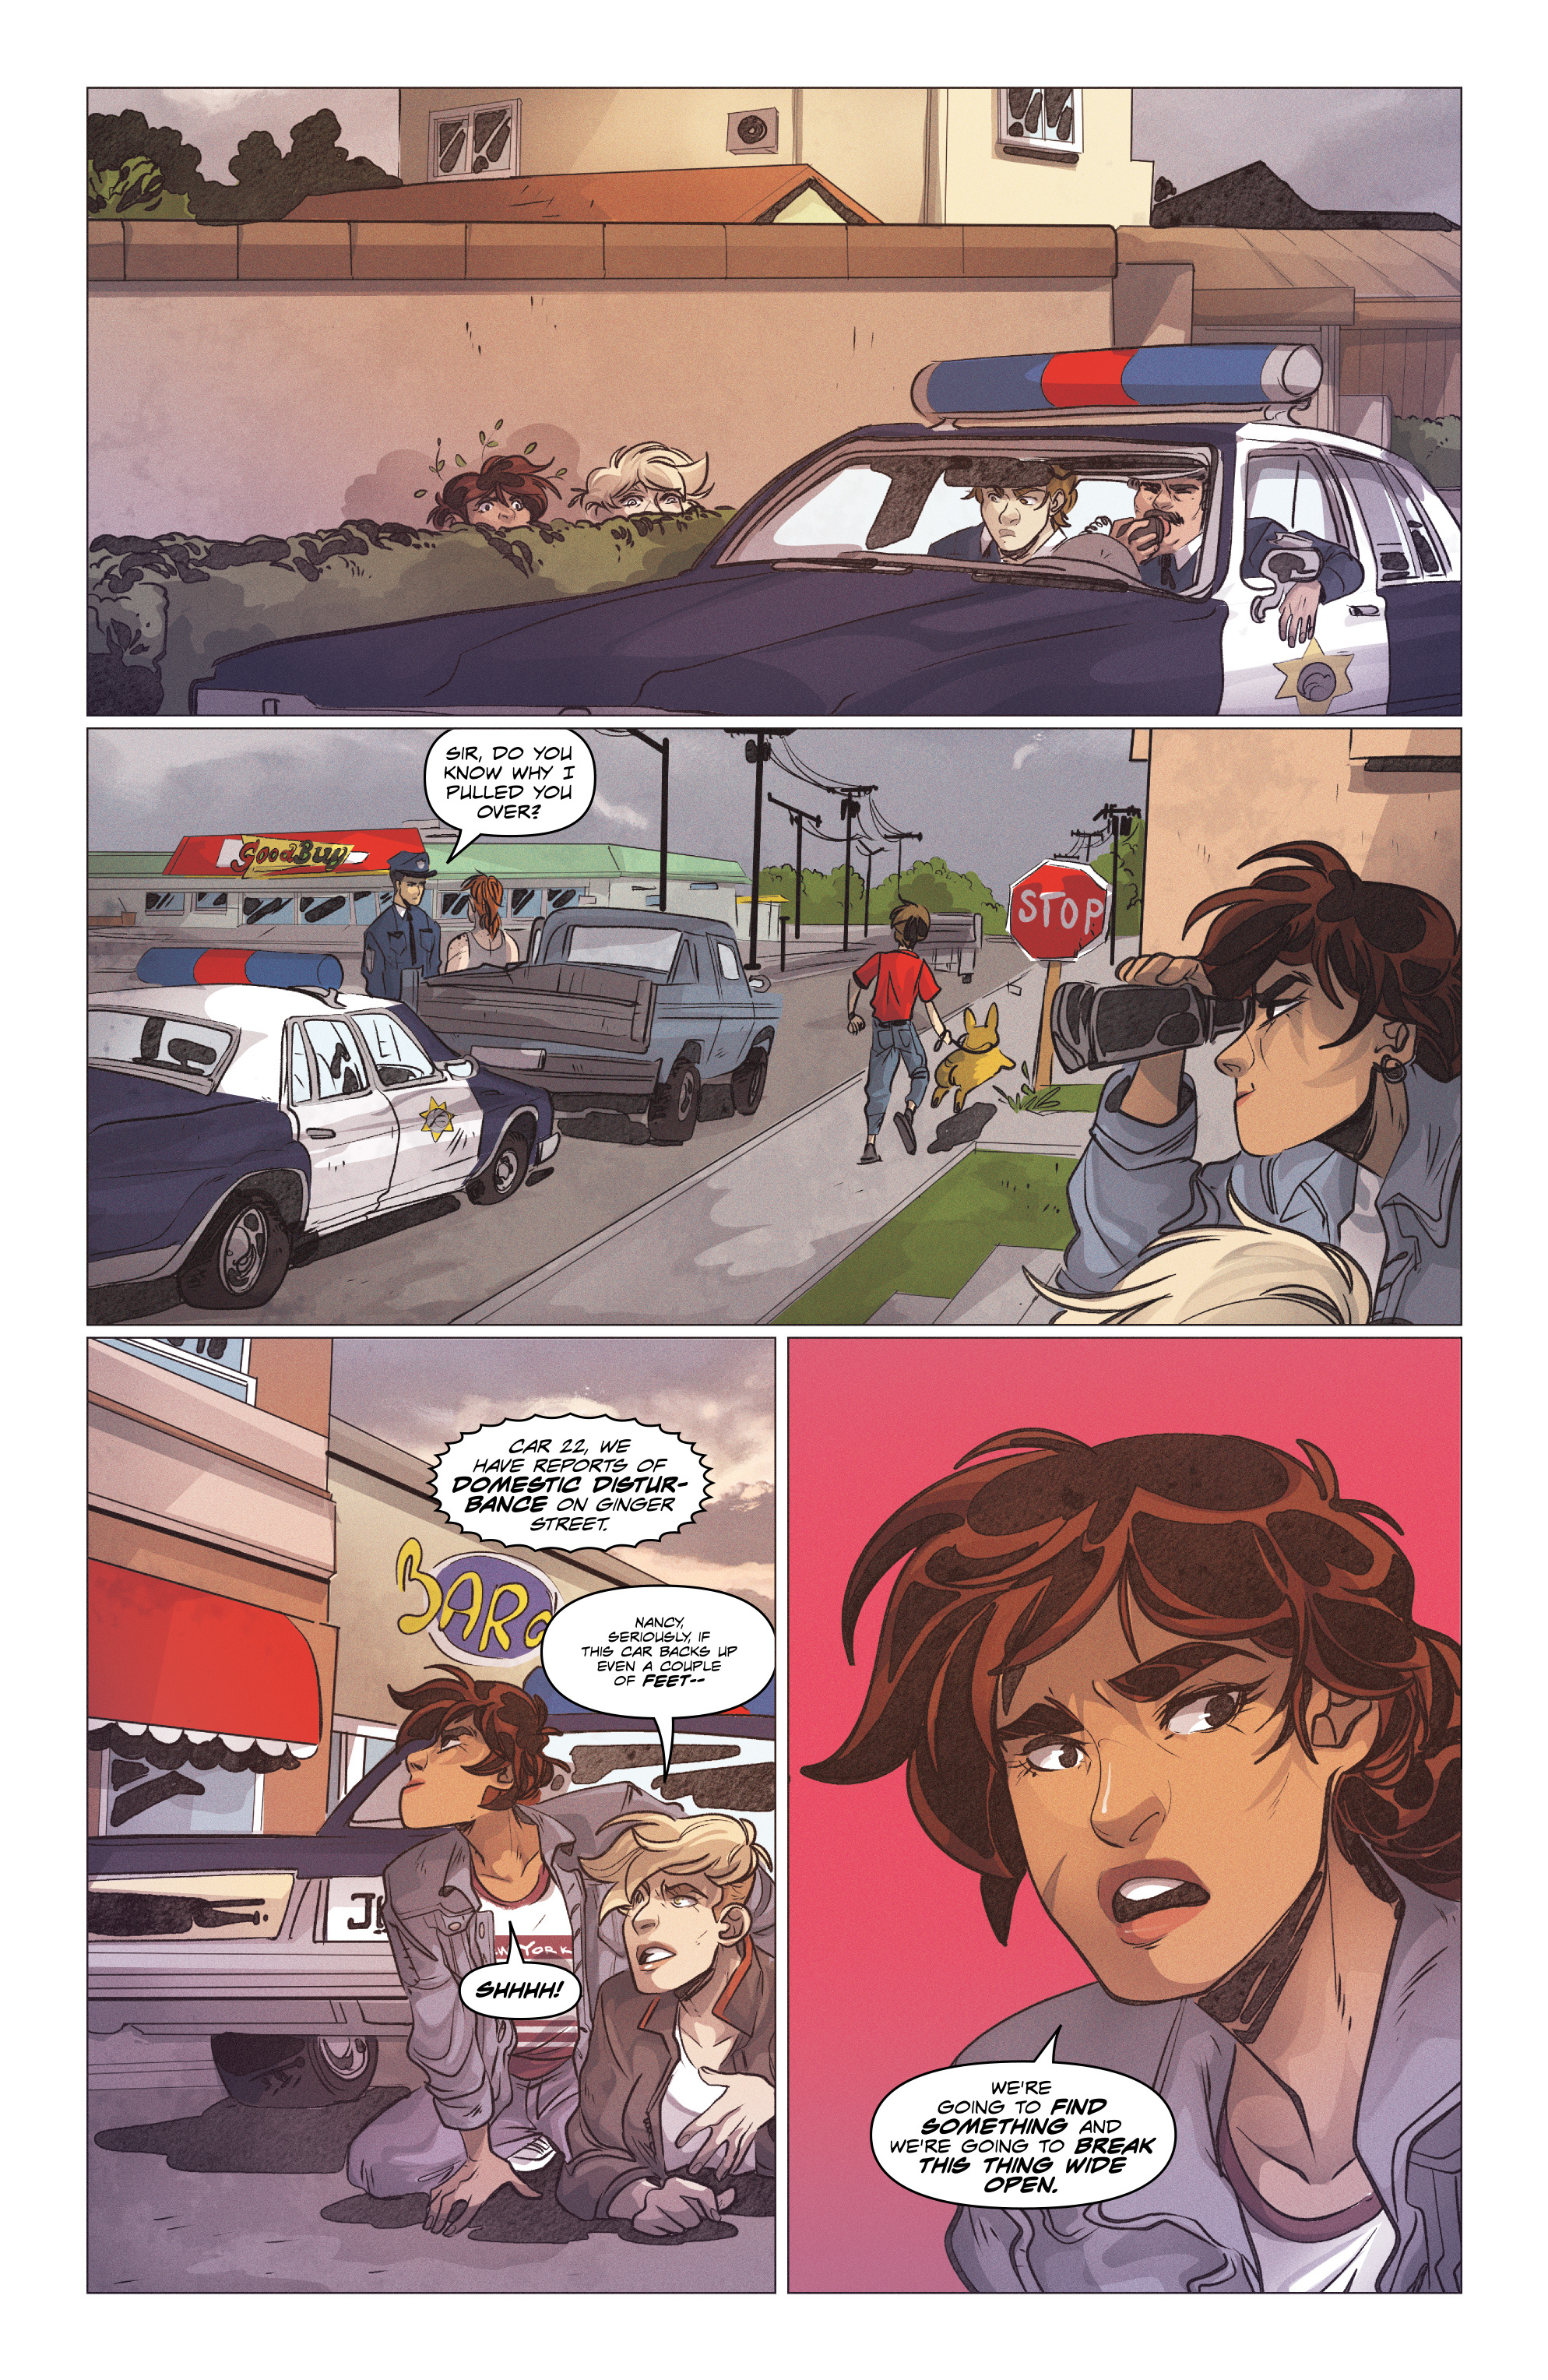 Morning in America (2019-): Chapter 2 - Page 4